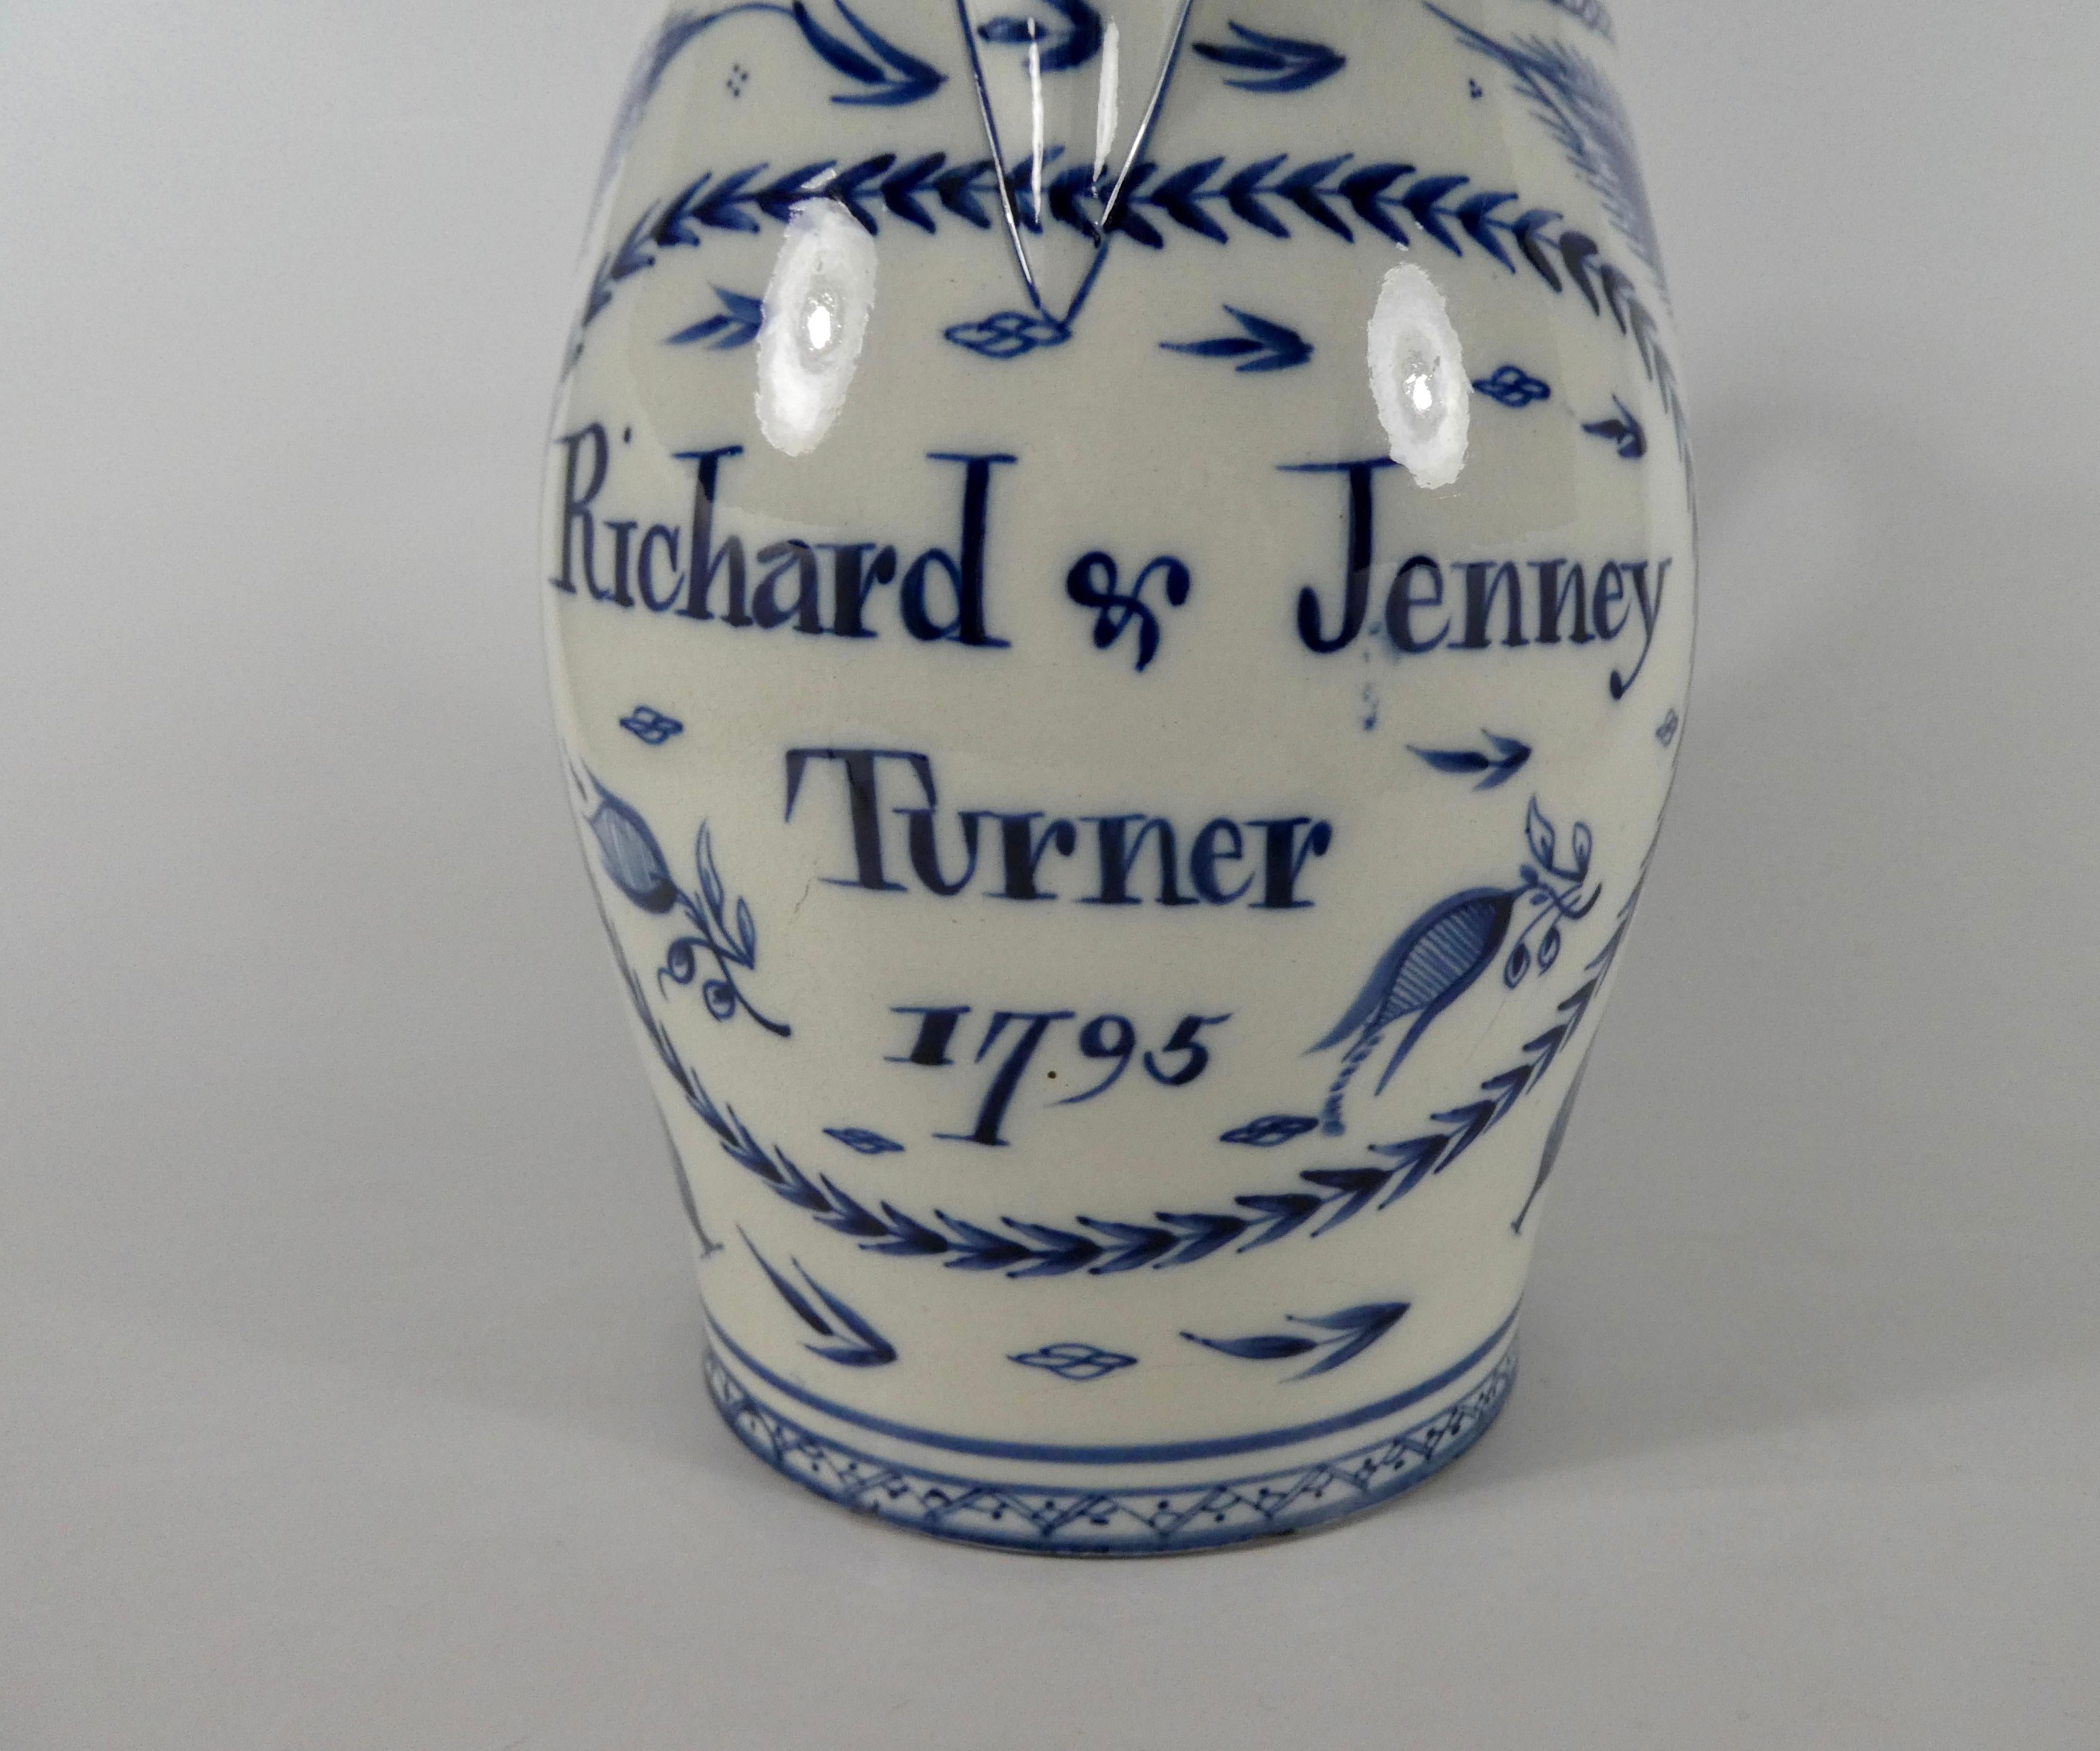 Liverpool pottery pearlware jug, dated 1795. Hand painted in underglaze blue, with an inscription ‘Richard & Jenney Turner, 1795’, within a laurel wreath cartouche. Either side painted with elaborate sprays of flowers, beneath a chevron border. The